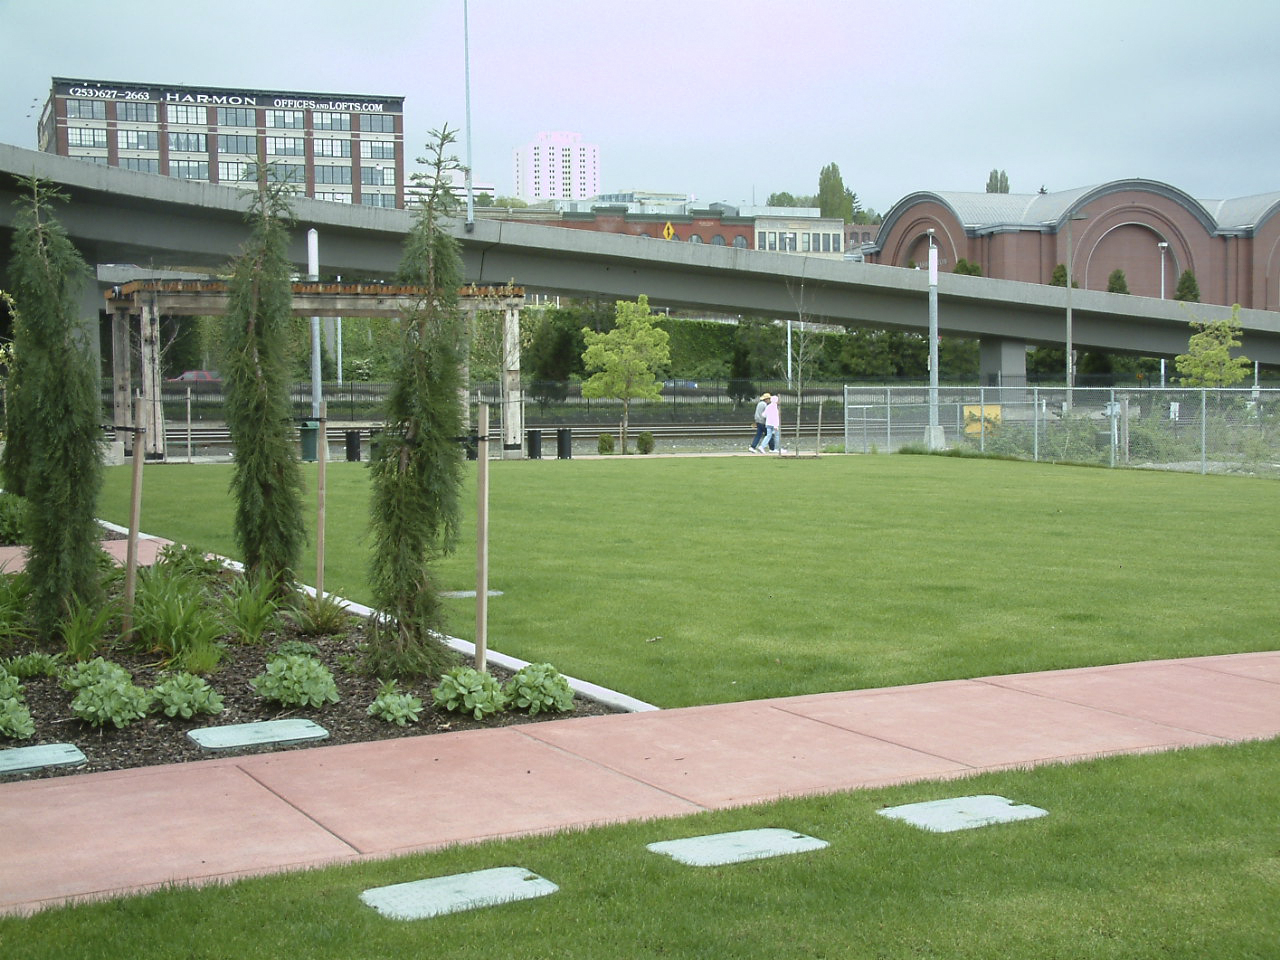 The City of Tacoma is requesting a $60,000 grant from the Washington State Recreation and Conservation Office to help pay for a children's play area at a City-owned park near South 21st Street and Dock Street. The eco-friendly play area would feature a LEED-certified mat surface and landscaping with native plants. It would also expand the diversity of use within the park and draw more visitors and activities to the area. The project is a partnership between the City of Tacoma, Foss Waterway Development Authority, and The Henry Group, a private developer currently constructing a 161-unit, $32 million apartment building nearby. (IMAGE COURTESY CITY OF TACOMA)